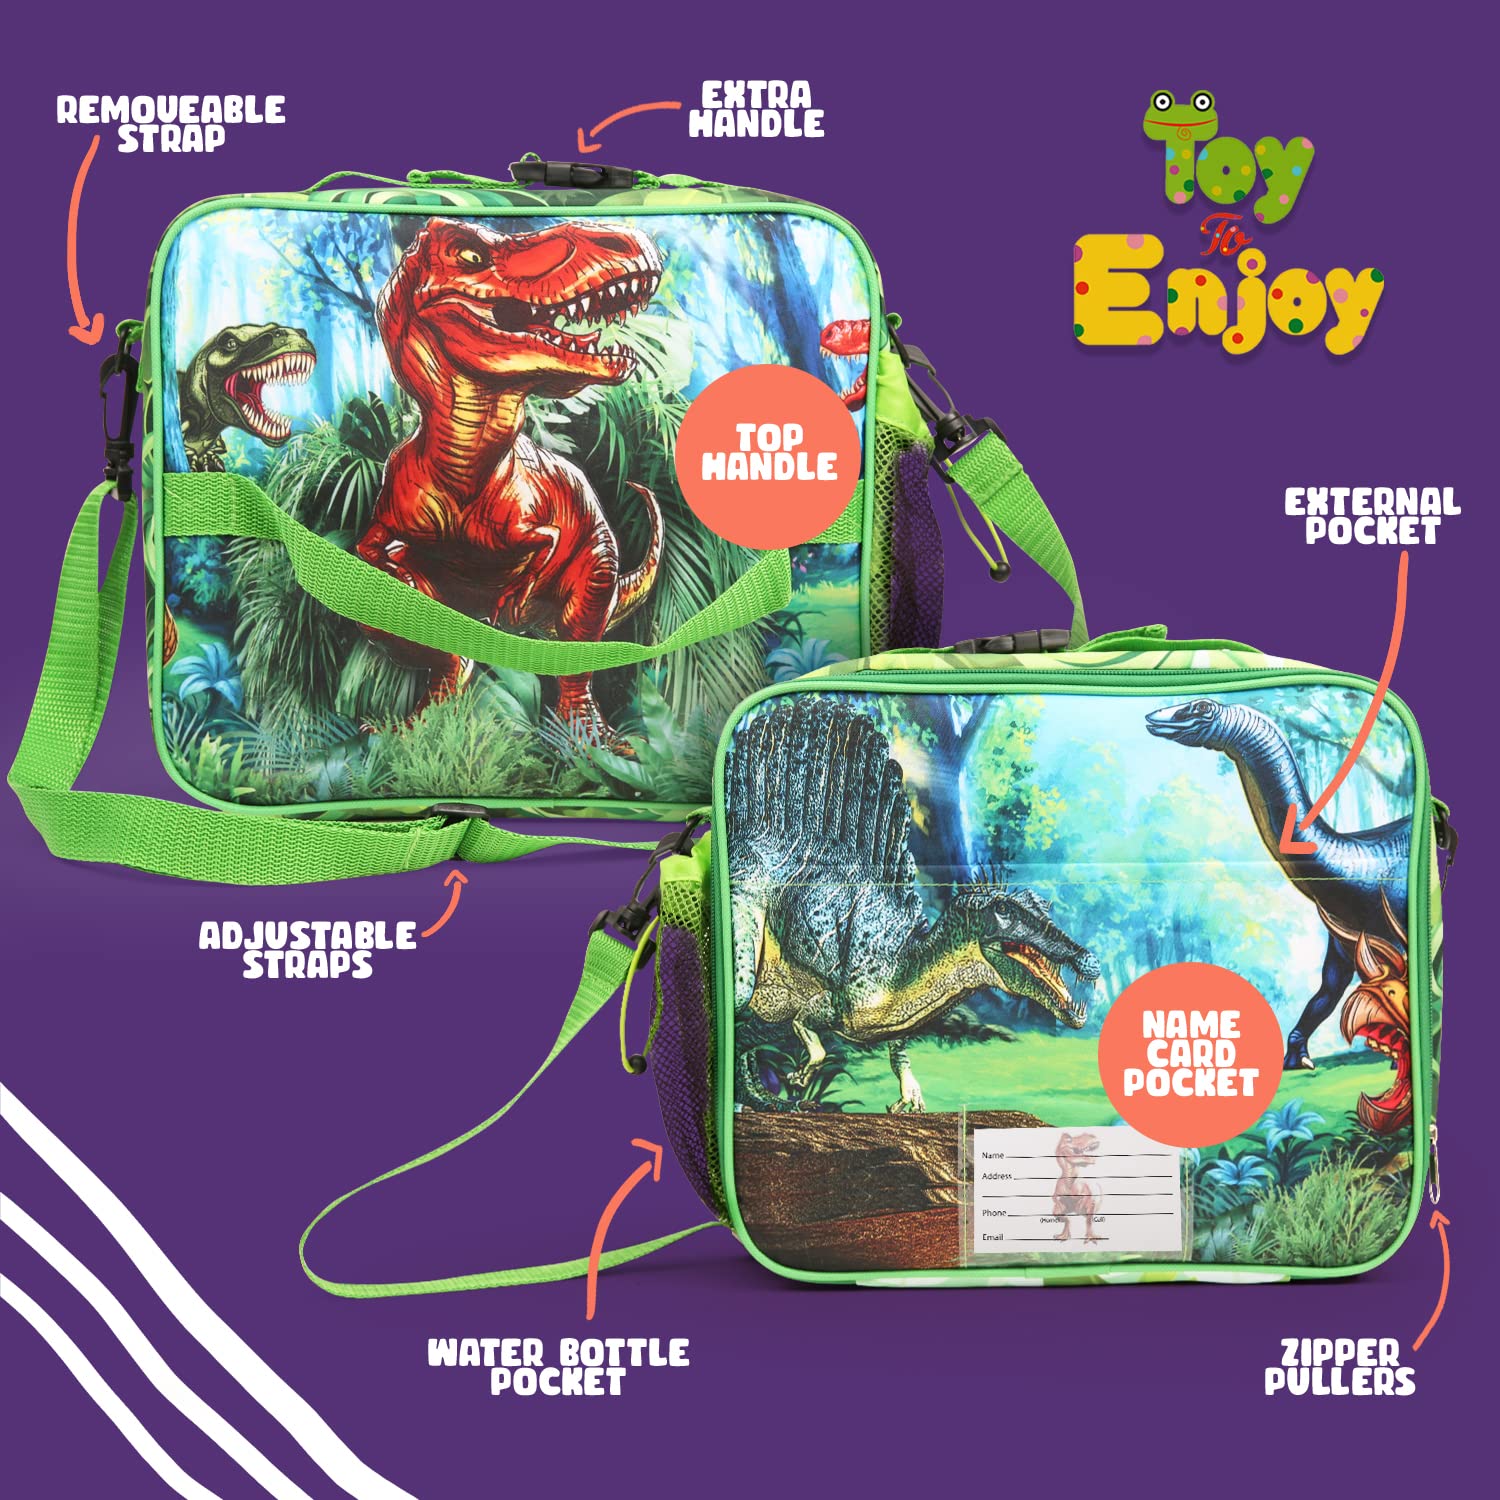 Insulated Lunch Box Bag for Kids, Reusable Durable Lightweight Lunch Bag  for Girls Boys, Keep Food Cold/Warm, Dinosaur